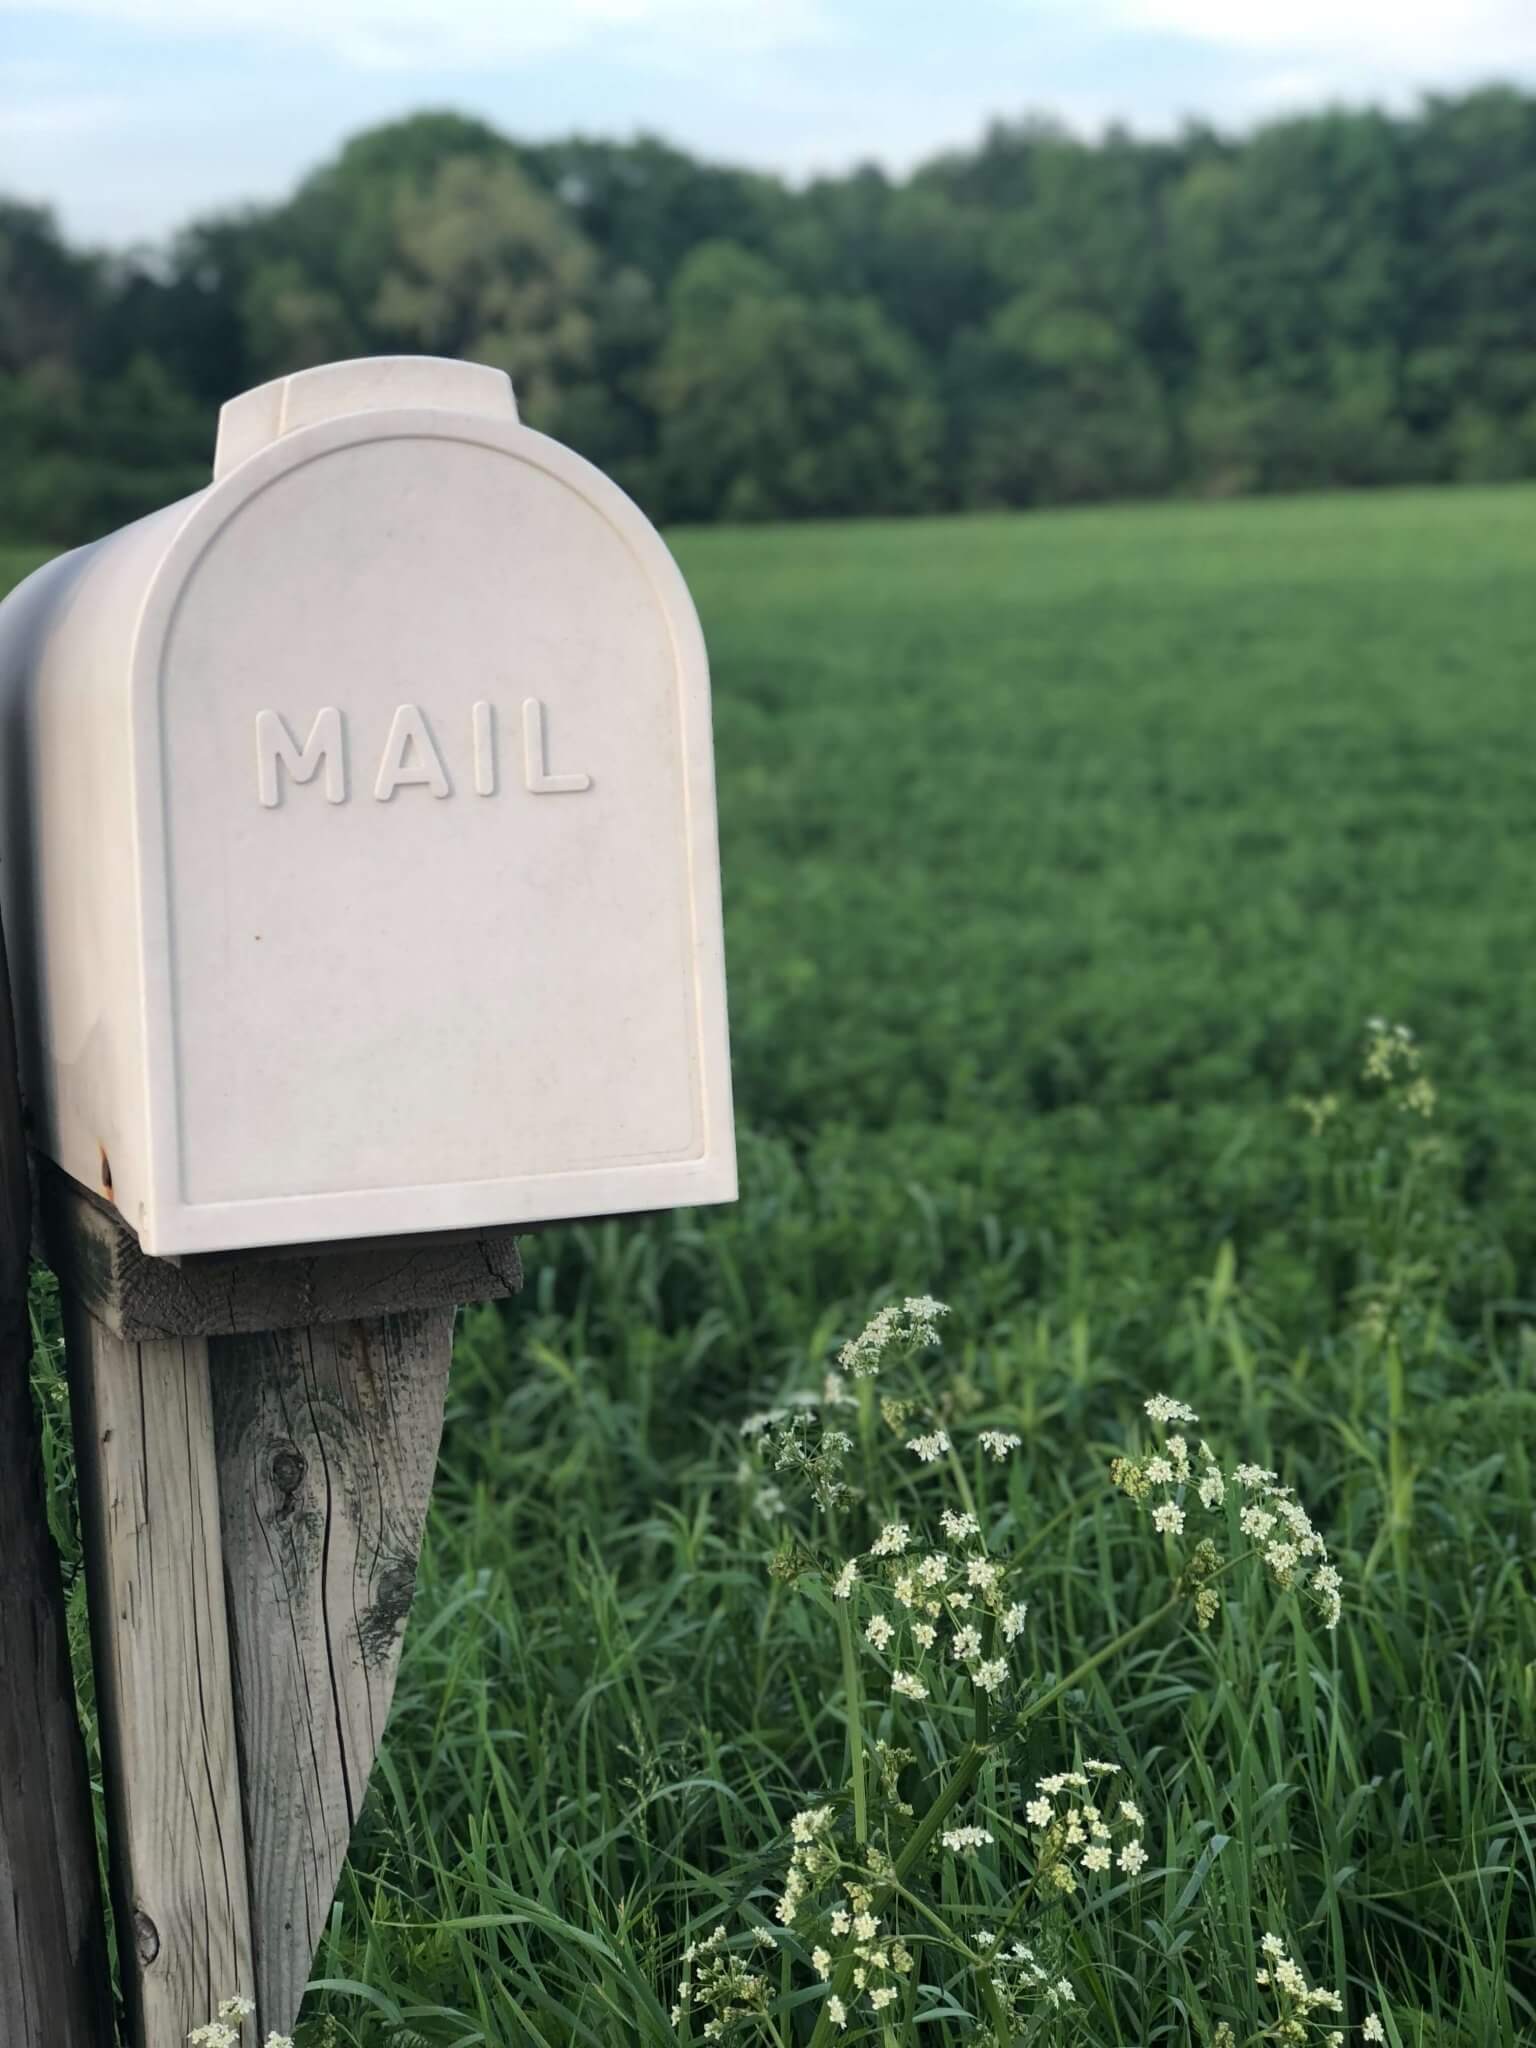 Dumping mail…dishonest, malicious, or lazy?